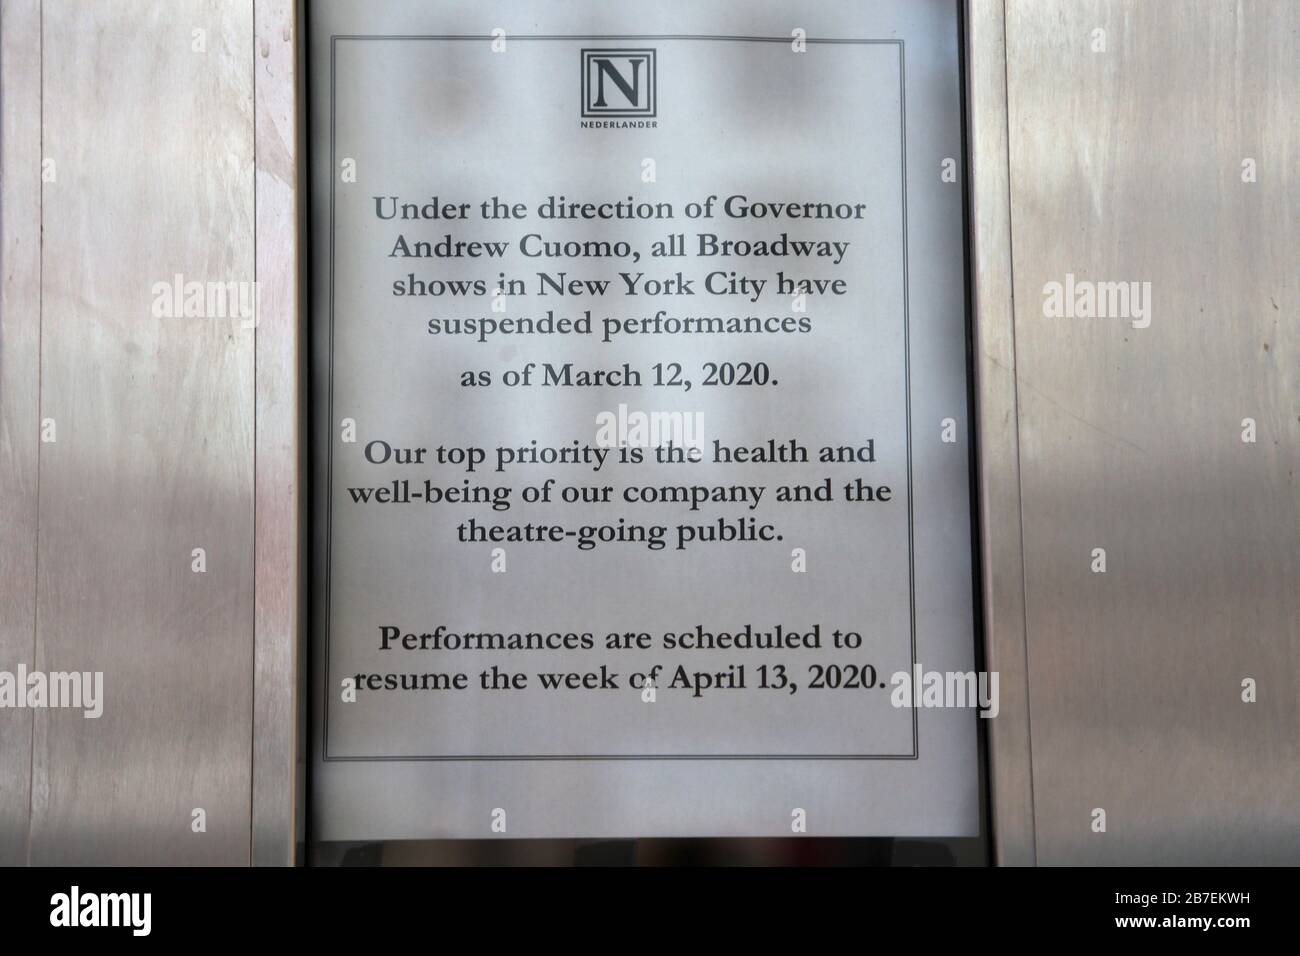 Sign saying Nederlander Theatre closed due to cancellation of Broadway shows until April 13 in wake of Coronavirus, New York City, March 15, 2020 Stock Photo